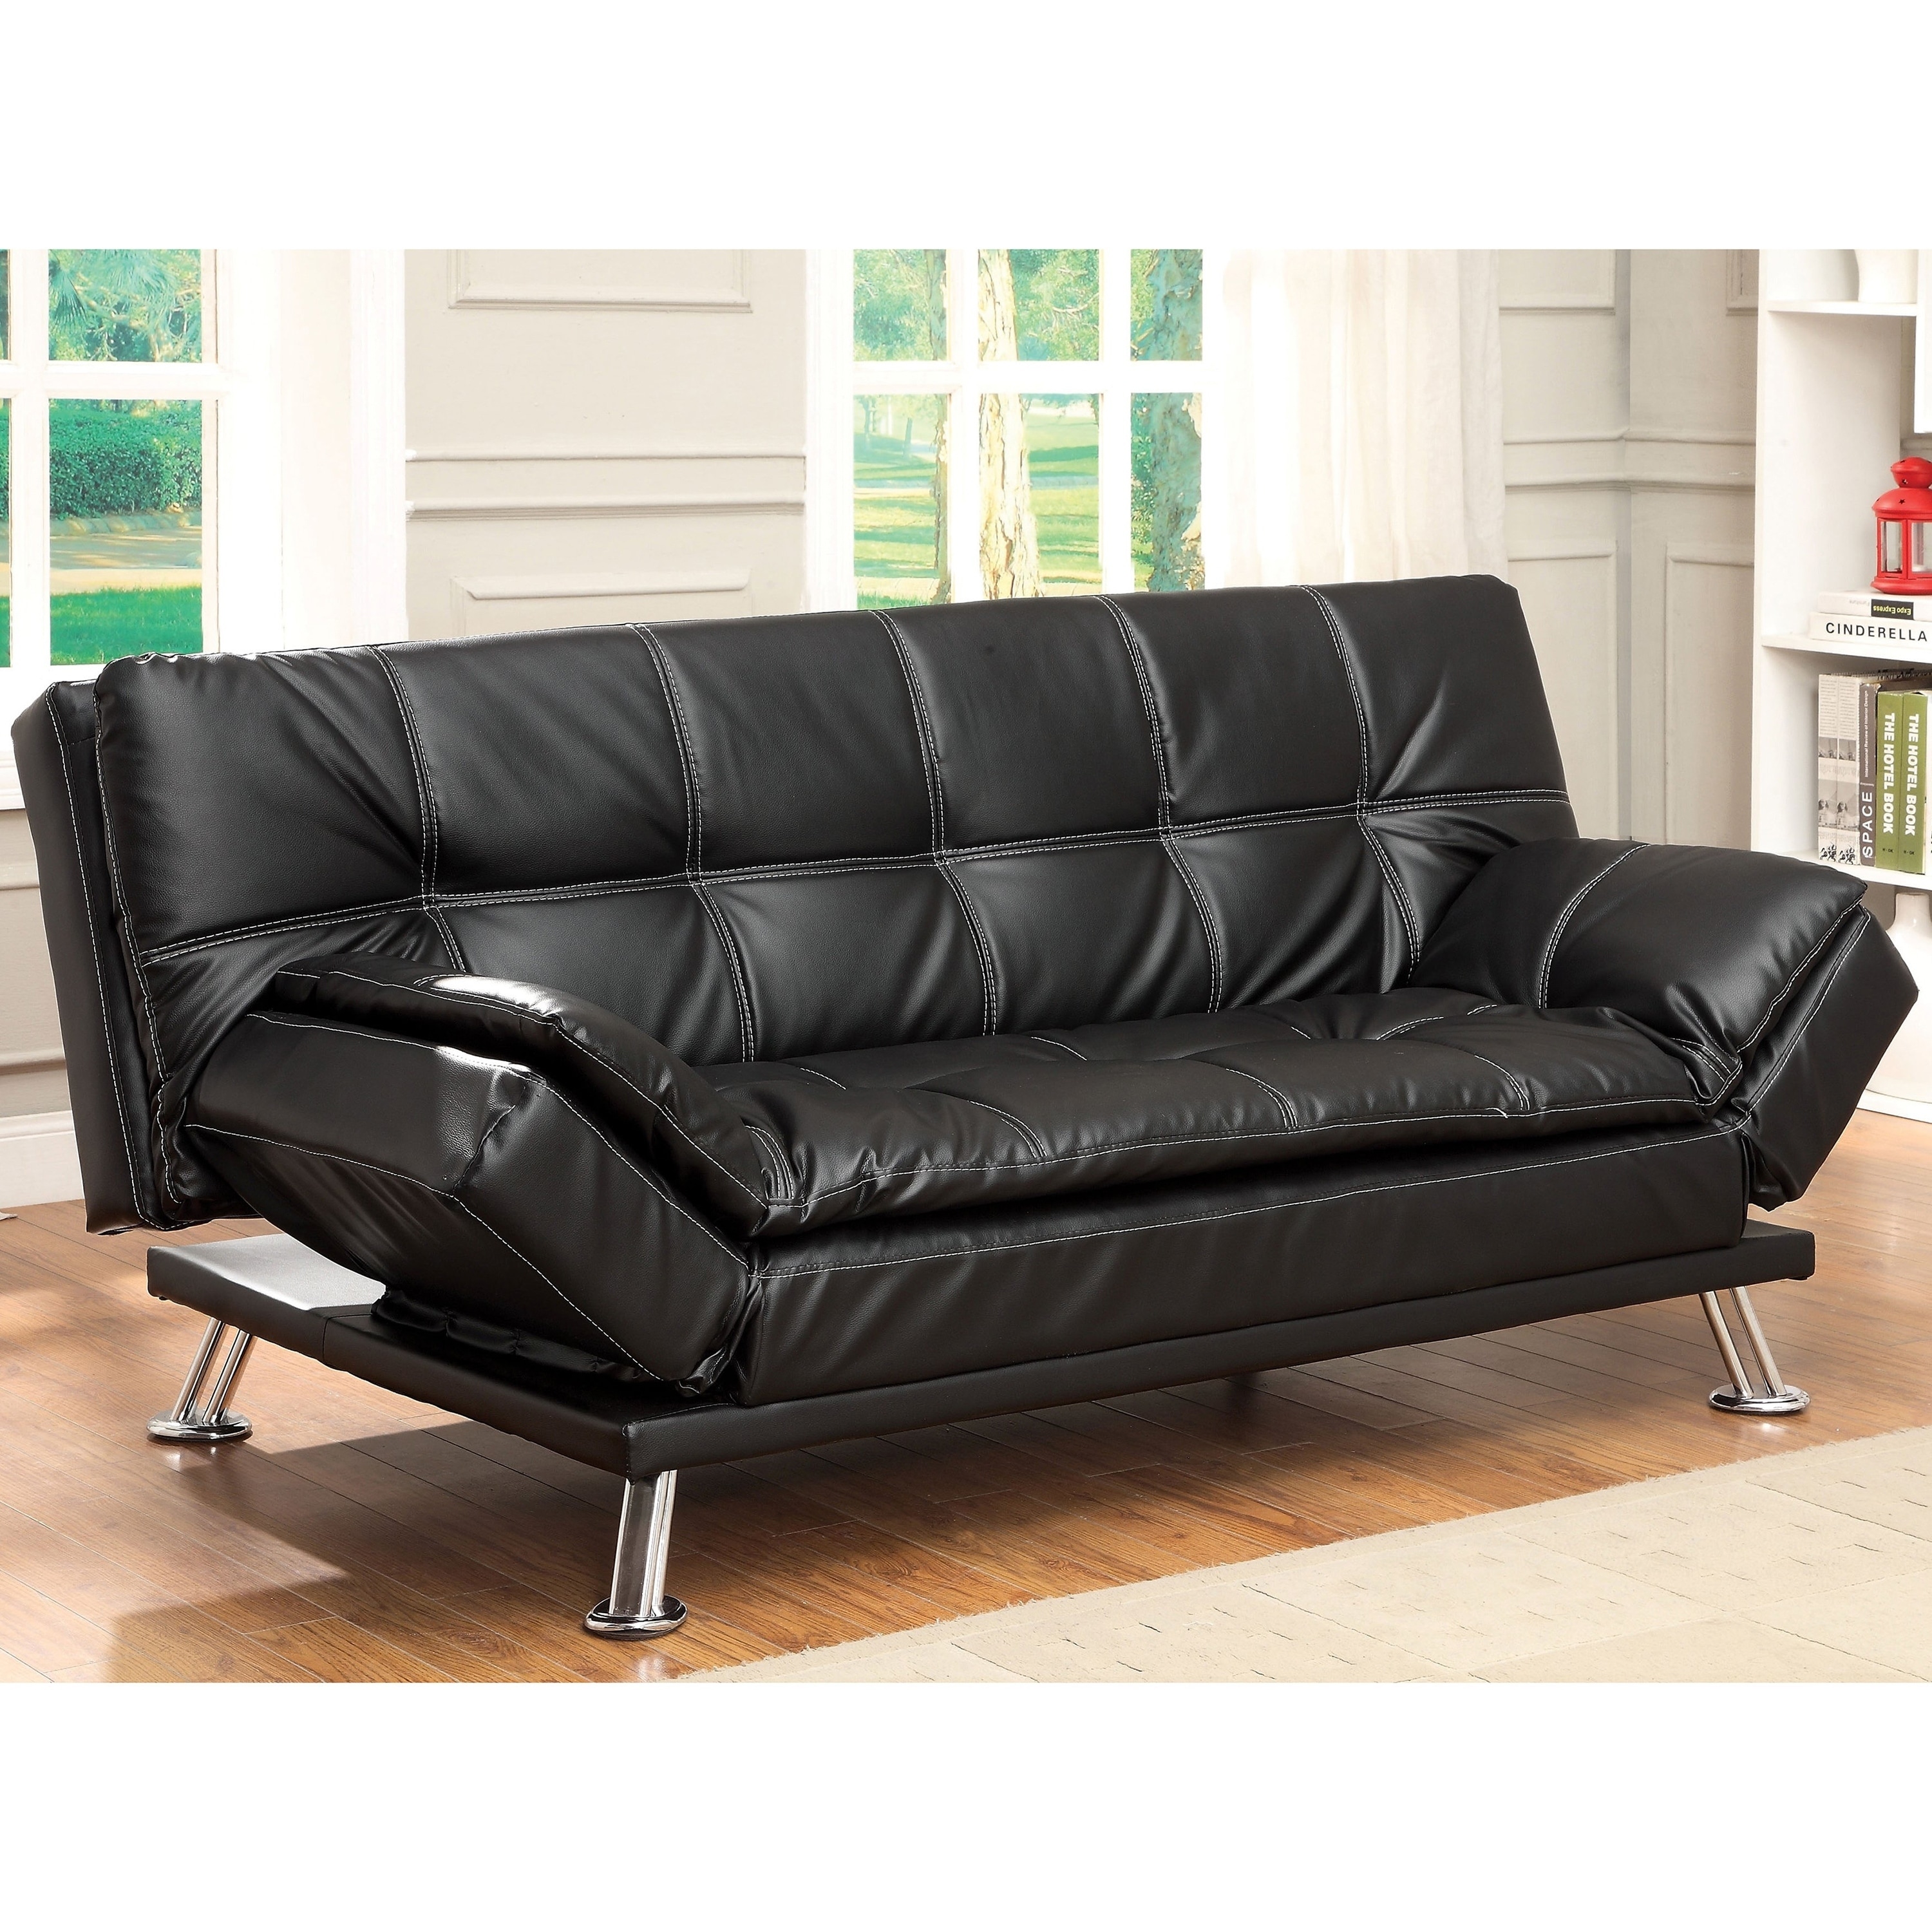 Furniture Of America Wiva Contemporary Faux Leather Upholstered Futon Sofa Overstock 9762564 Black